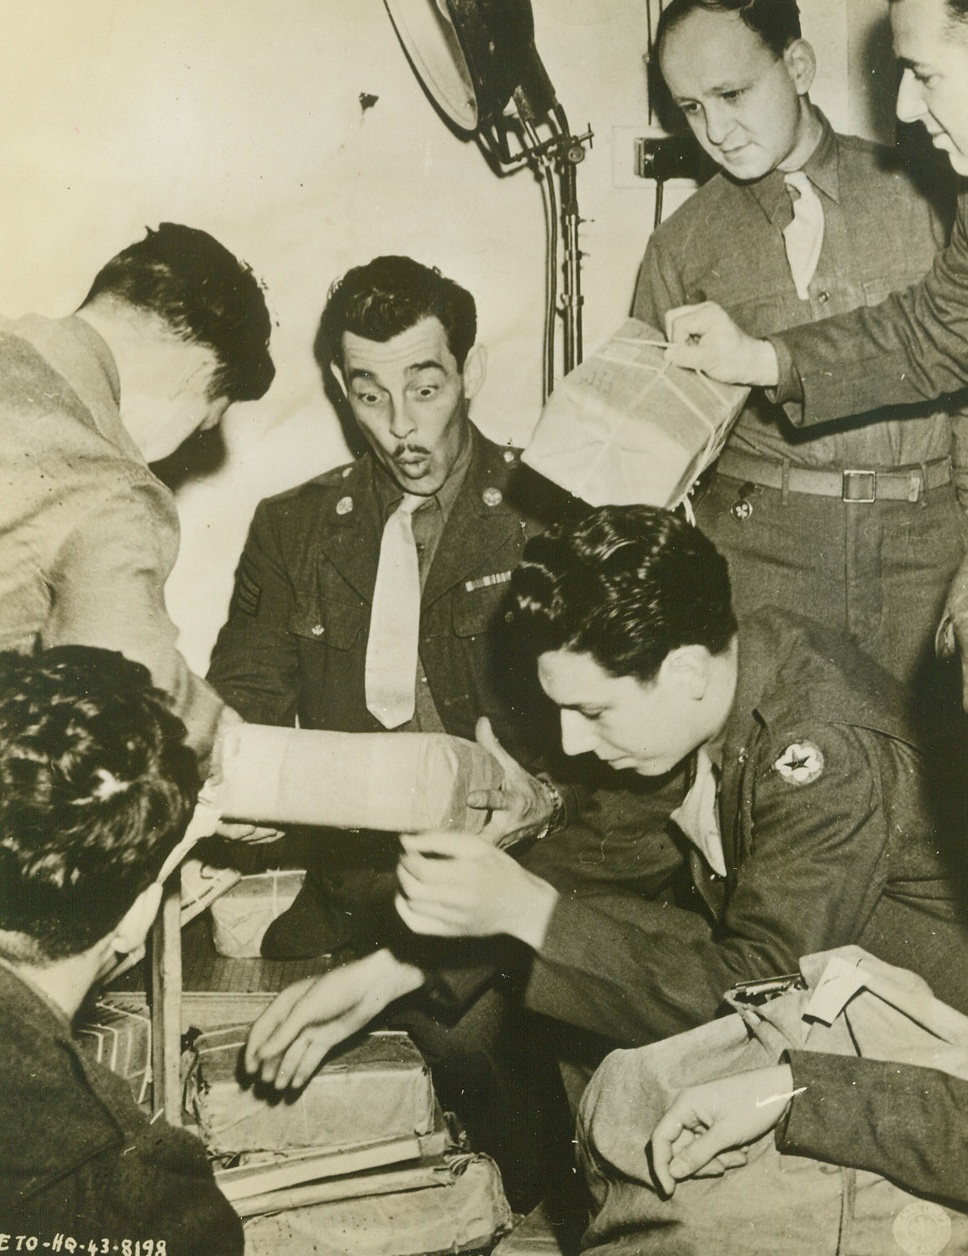 It’s Christmas for Yanks in Britain, 12/13/1943. England – The arrival in England of Christmas packages for Americans soldiers brings cheer and anticipation to this group of Yanks. Sgt. Kenneth L. Thiem (center, facing camera), of Los Angeles, California, whistles with delight as he receives his package, while Pvt. Leslie Rachline (kneeling, right) of North Bergen, New Jersey, eagerly searches for his gift. At top right (left to right) are Pvt. Mitchell Kucharsky, Brooklyn, New York, and Pvt. Walter W. Newman, Fort Wayne, Indiana. Credit: U.S. Signal Corps Photo from ACME;